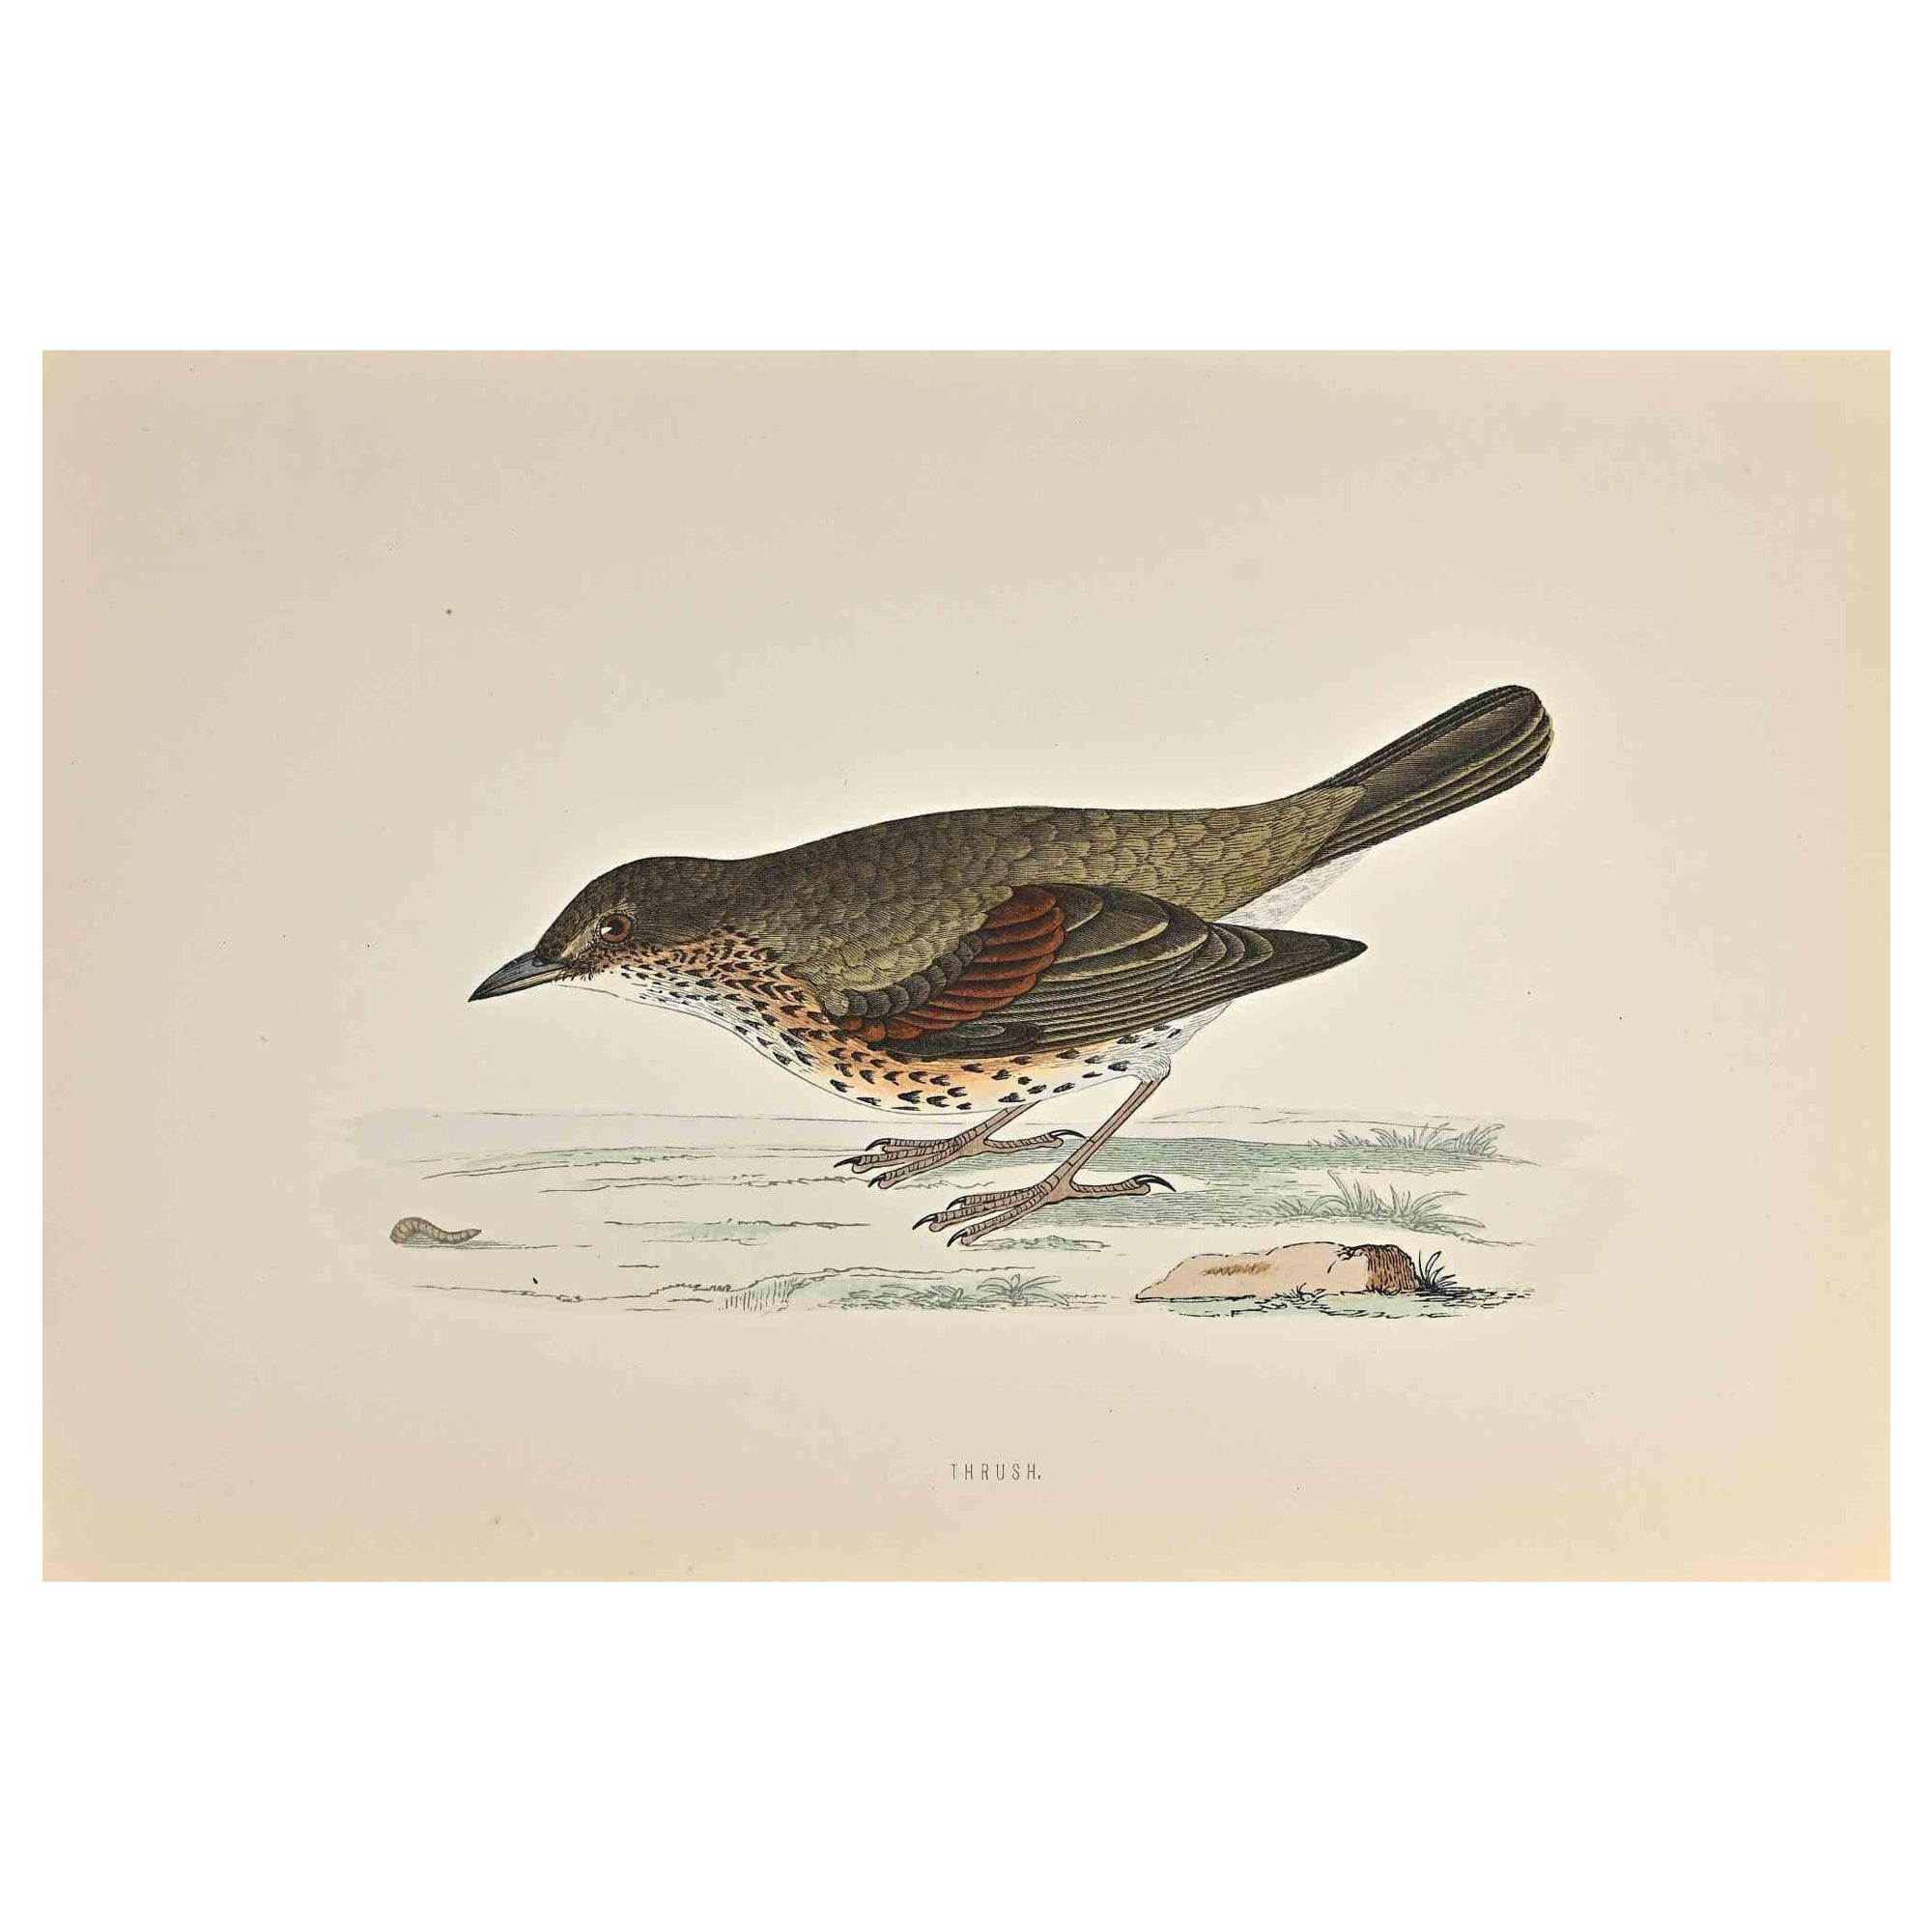 Thrush is a modern artwork realized in 1870 by the British artist Alexander Francis Lydon (1836-1917) . 

Woodcut print, hand colored, published by London, Bell & Sons, 1870.  Name of the bird printed in plate. This work is part of a print suite